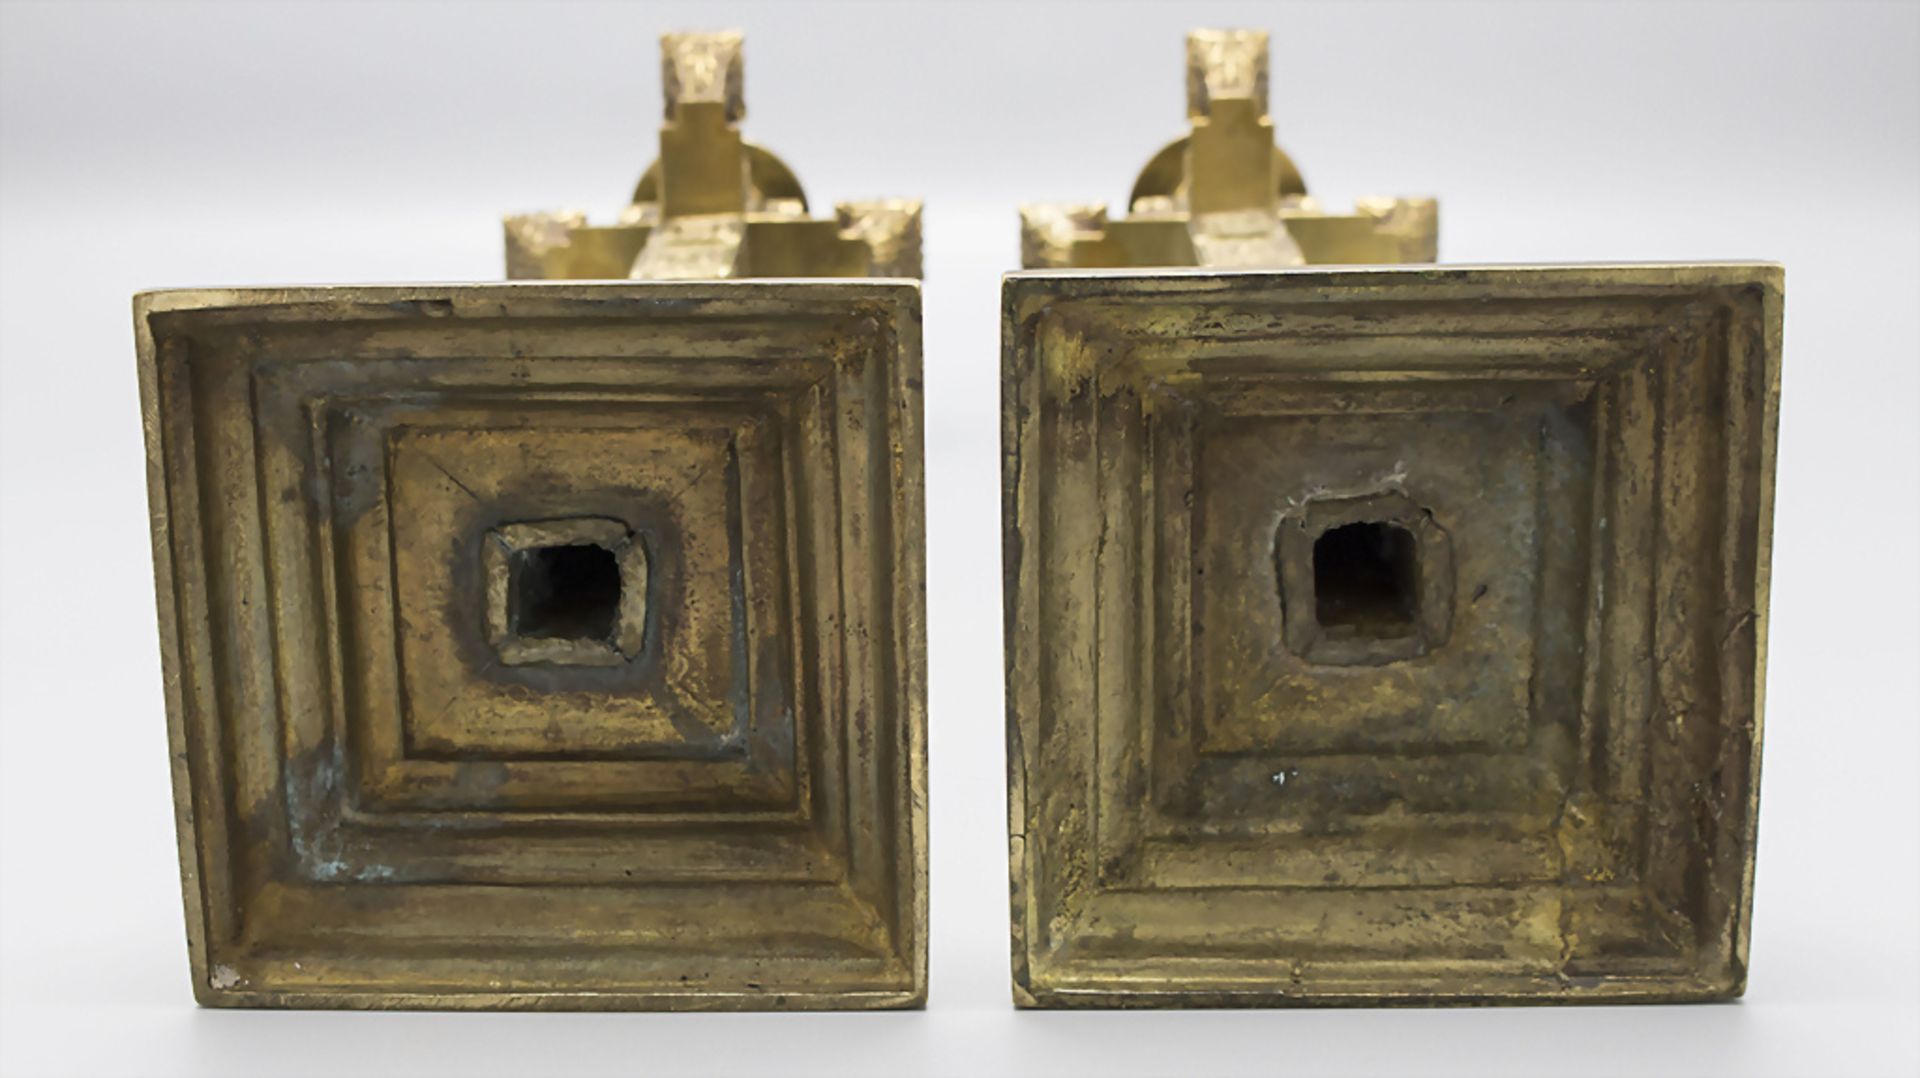 Paar Bronzeleuchter / A pair of bronze candle holders, wohl 19. Jh. - Image 3 of 4